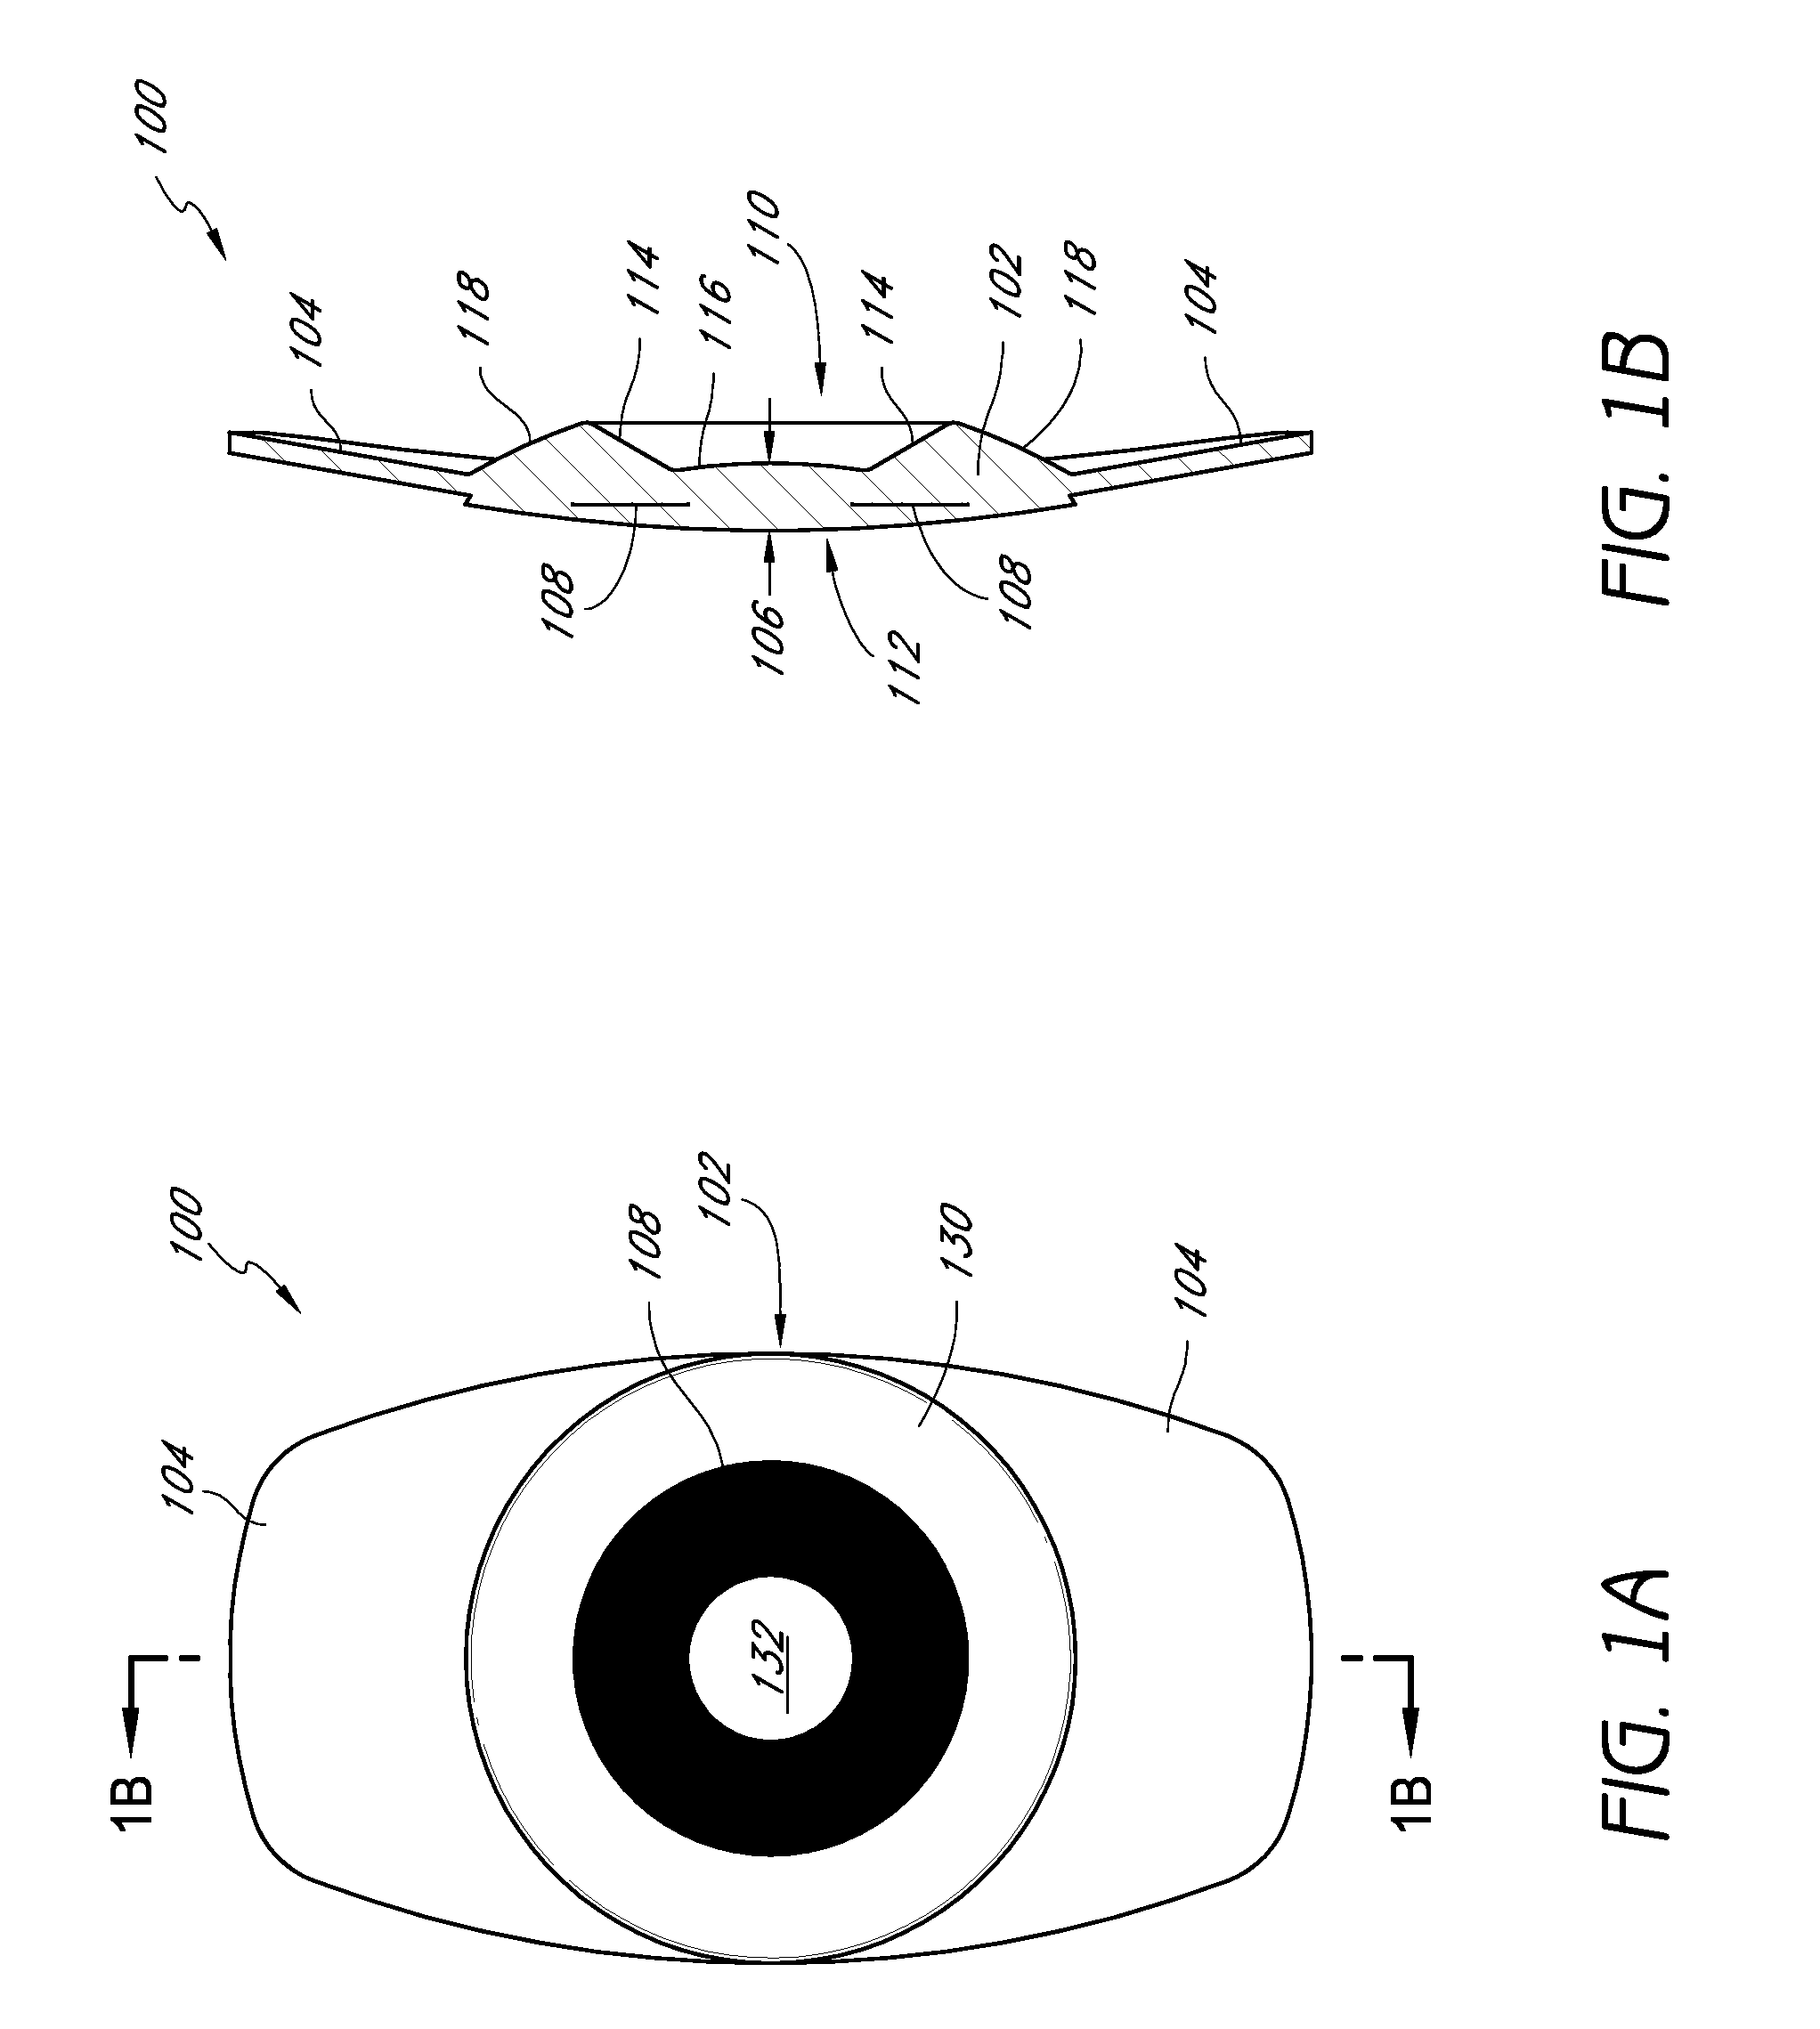 Masked intraocular implants and lenses